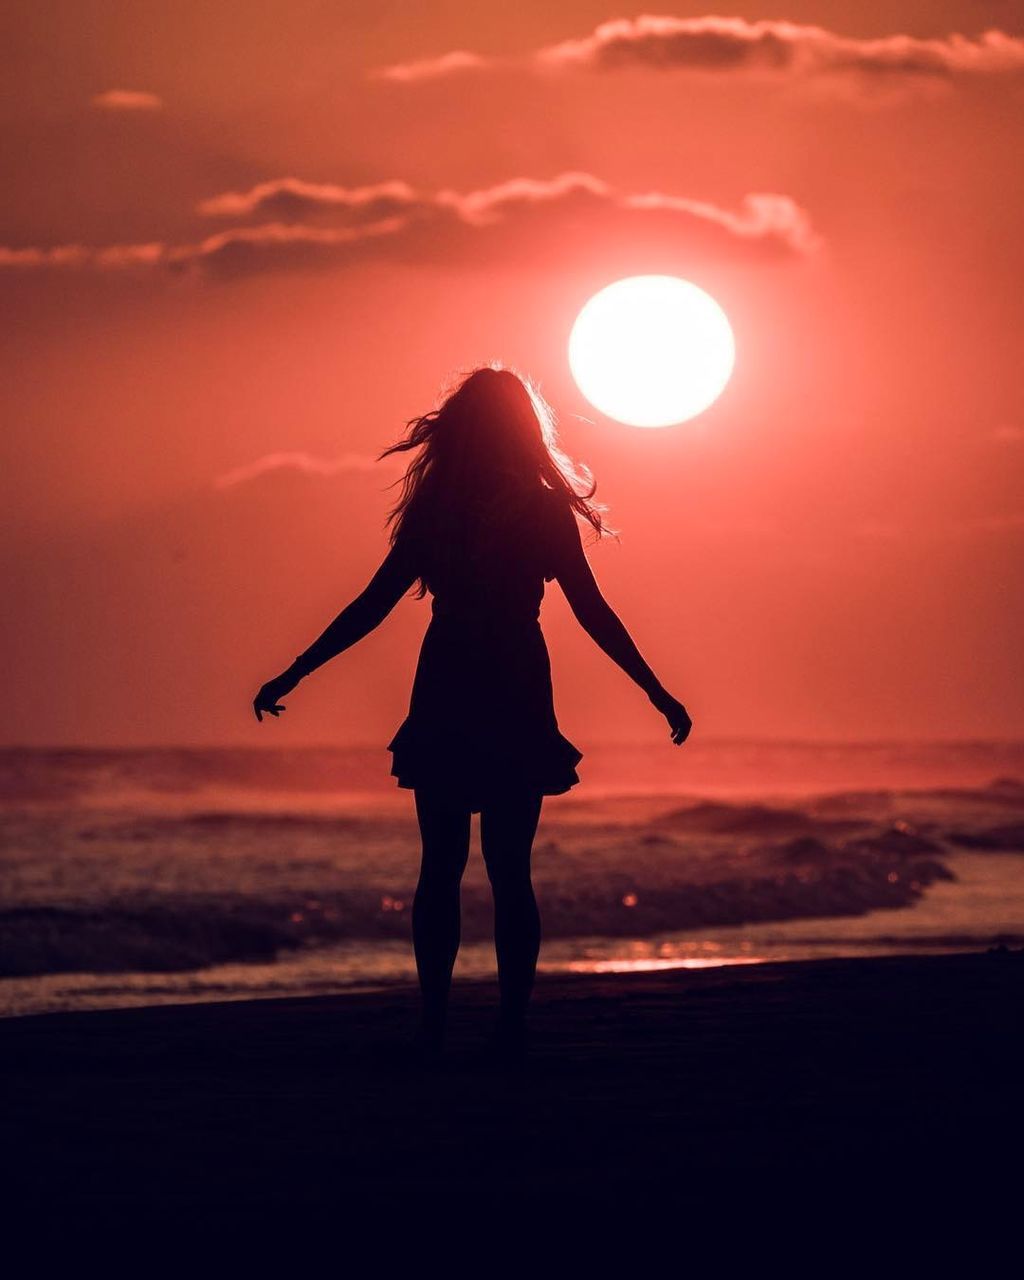 SILHOUETTE WOMAN STANDING ON BEACH AGAINST SUNSET SKY